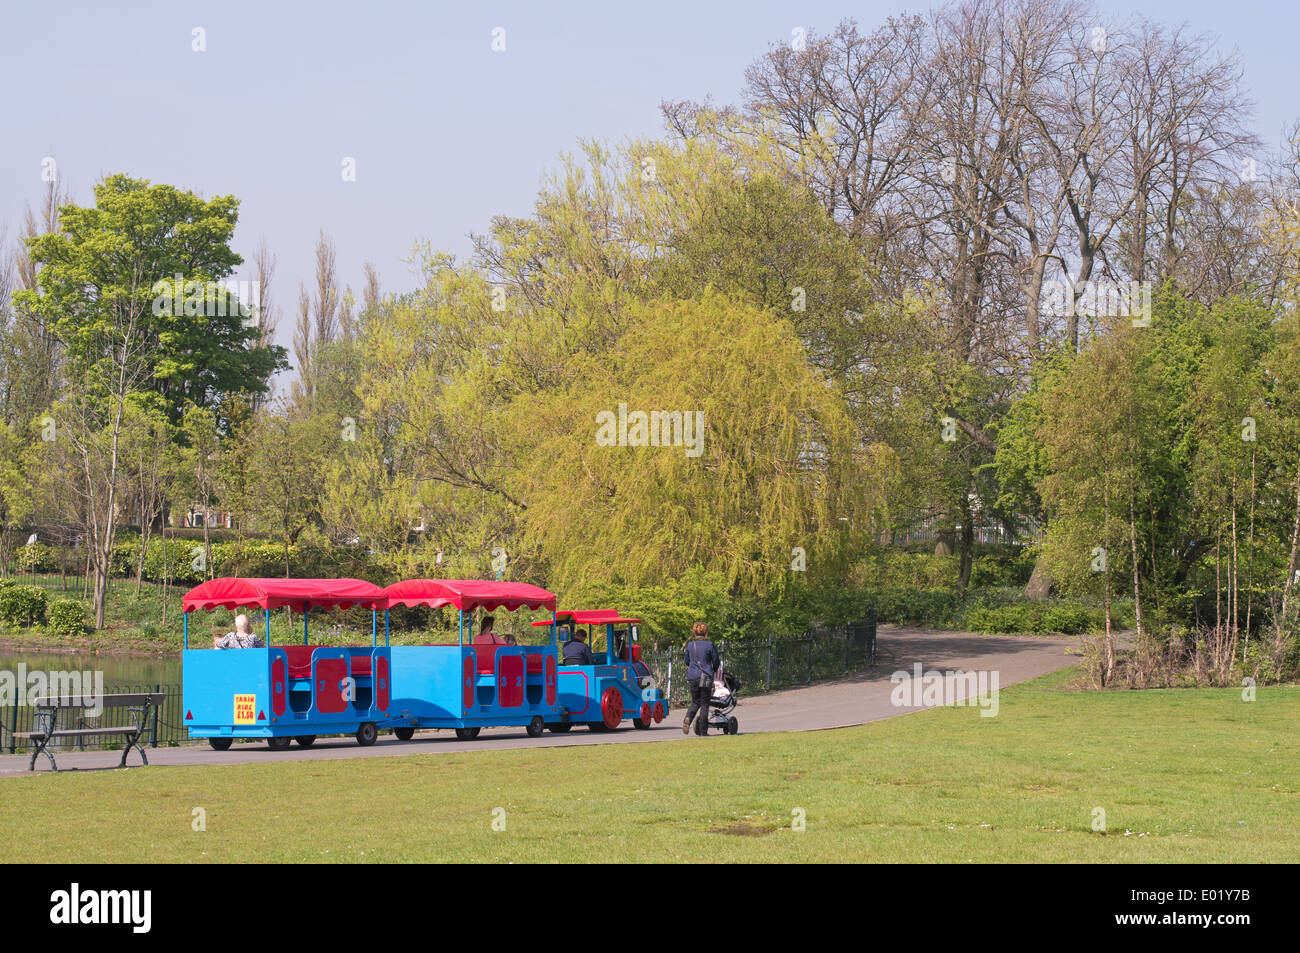 A road train as a visitor attraction within Saltwell Park Gateshead north east England UK Stock Photo